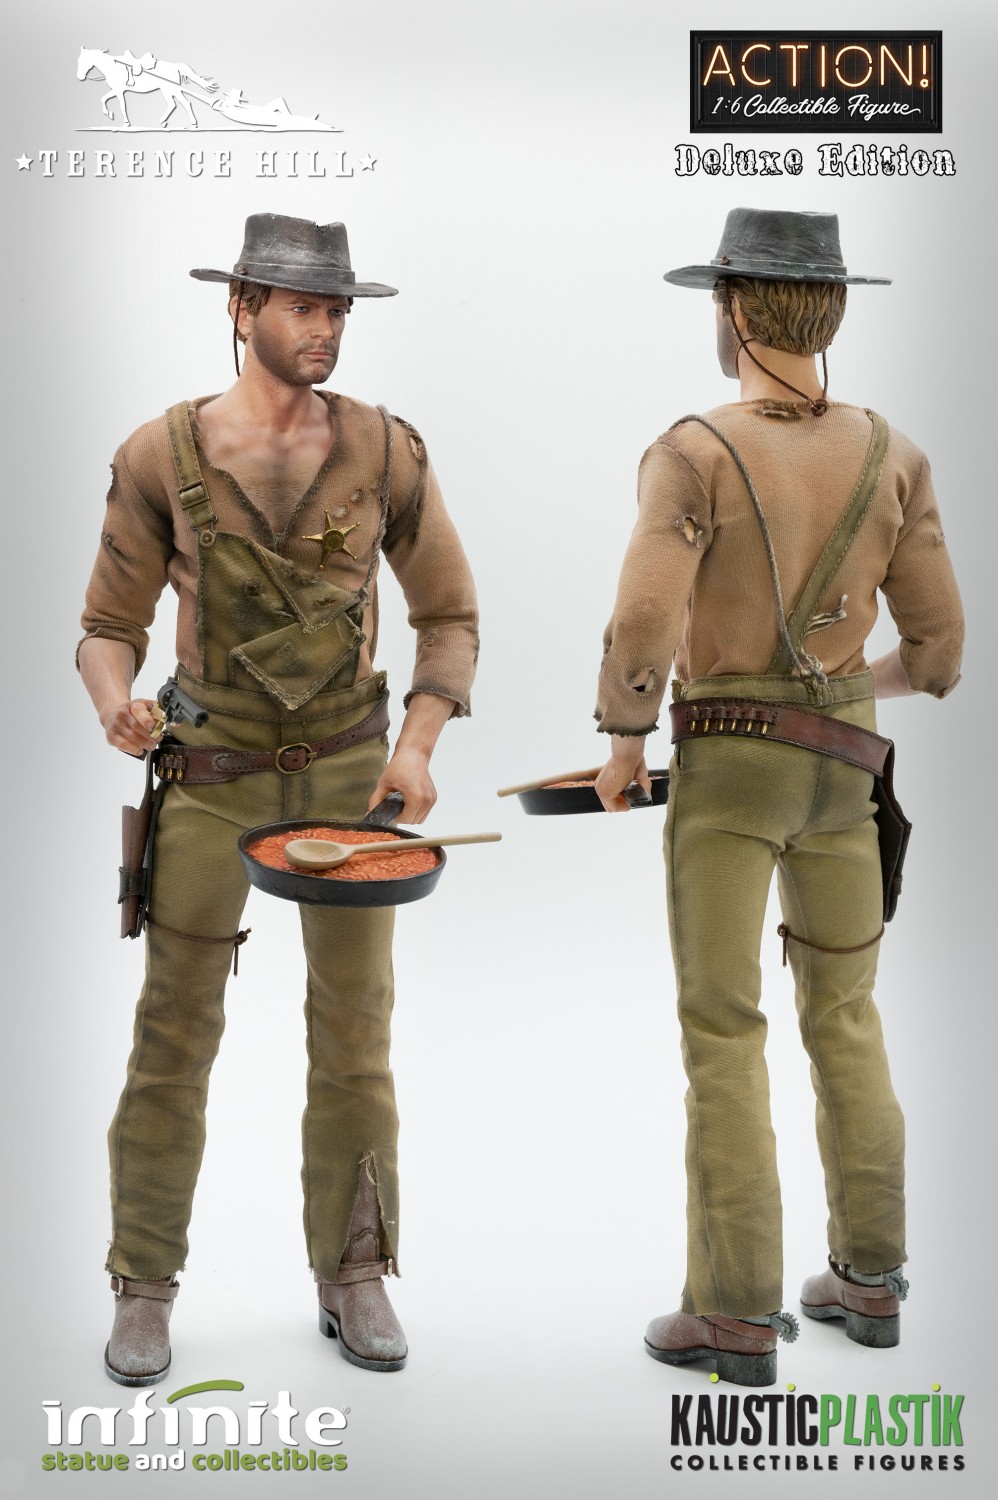 NEW PRODUCT: INFINITE STATUE & KAUSTIC PLASTIK TERENCE HILL 1/6 ACTION - REGULAR, DELUXE, EXCLUSIVE, DIORAMA Terence-hill-16-deluxe-edition-